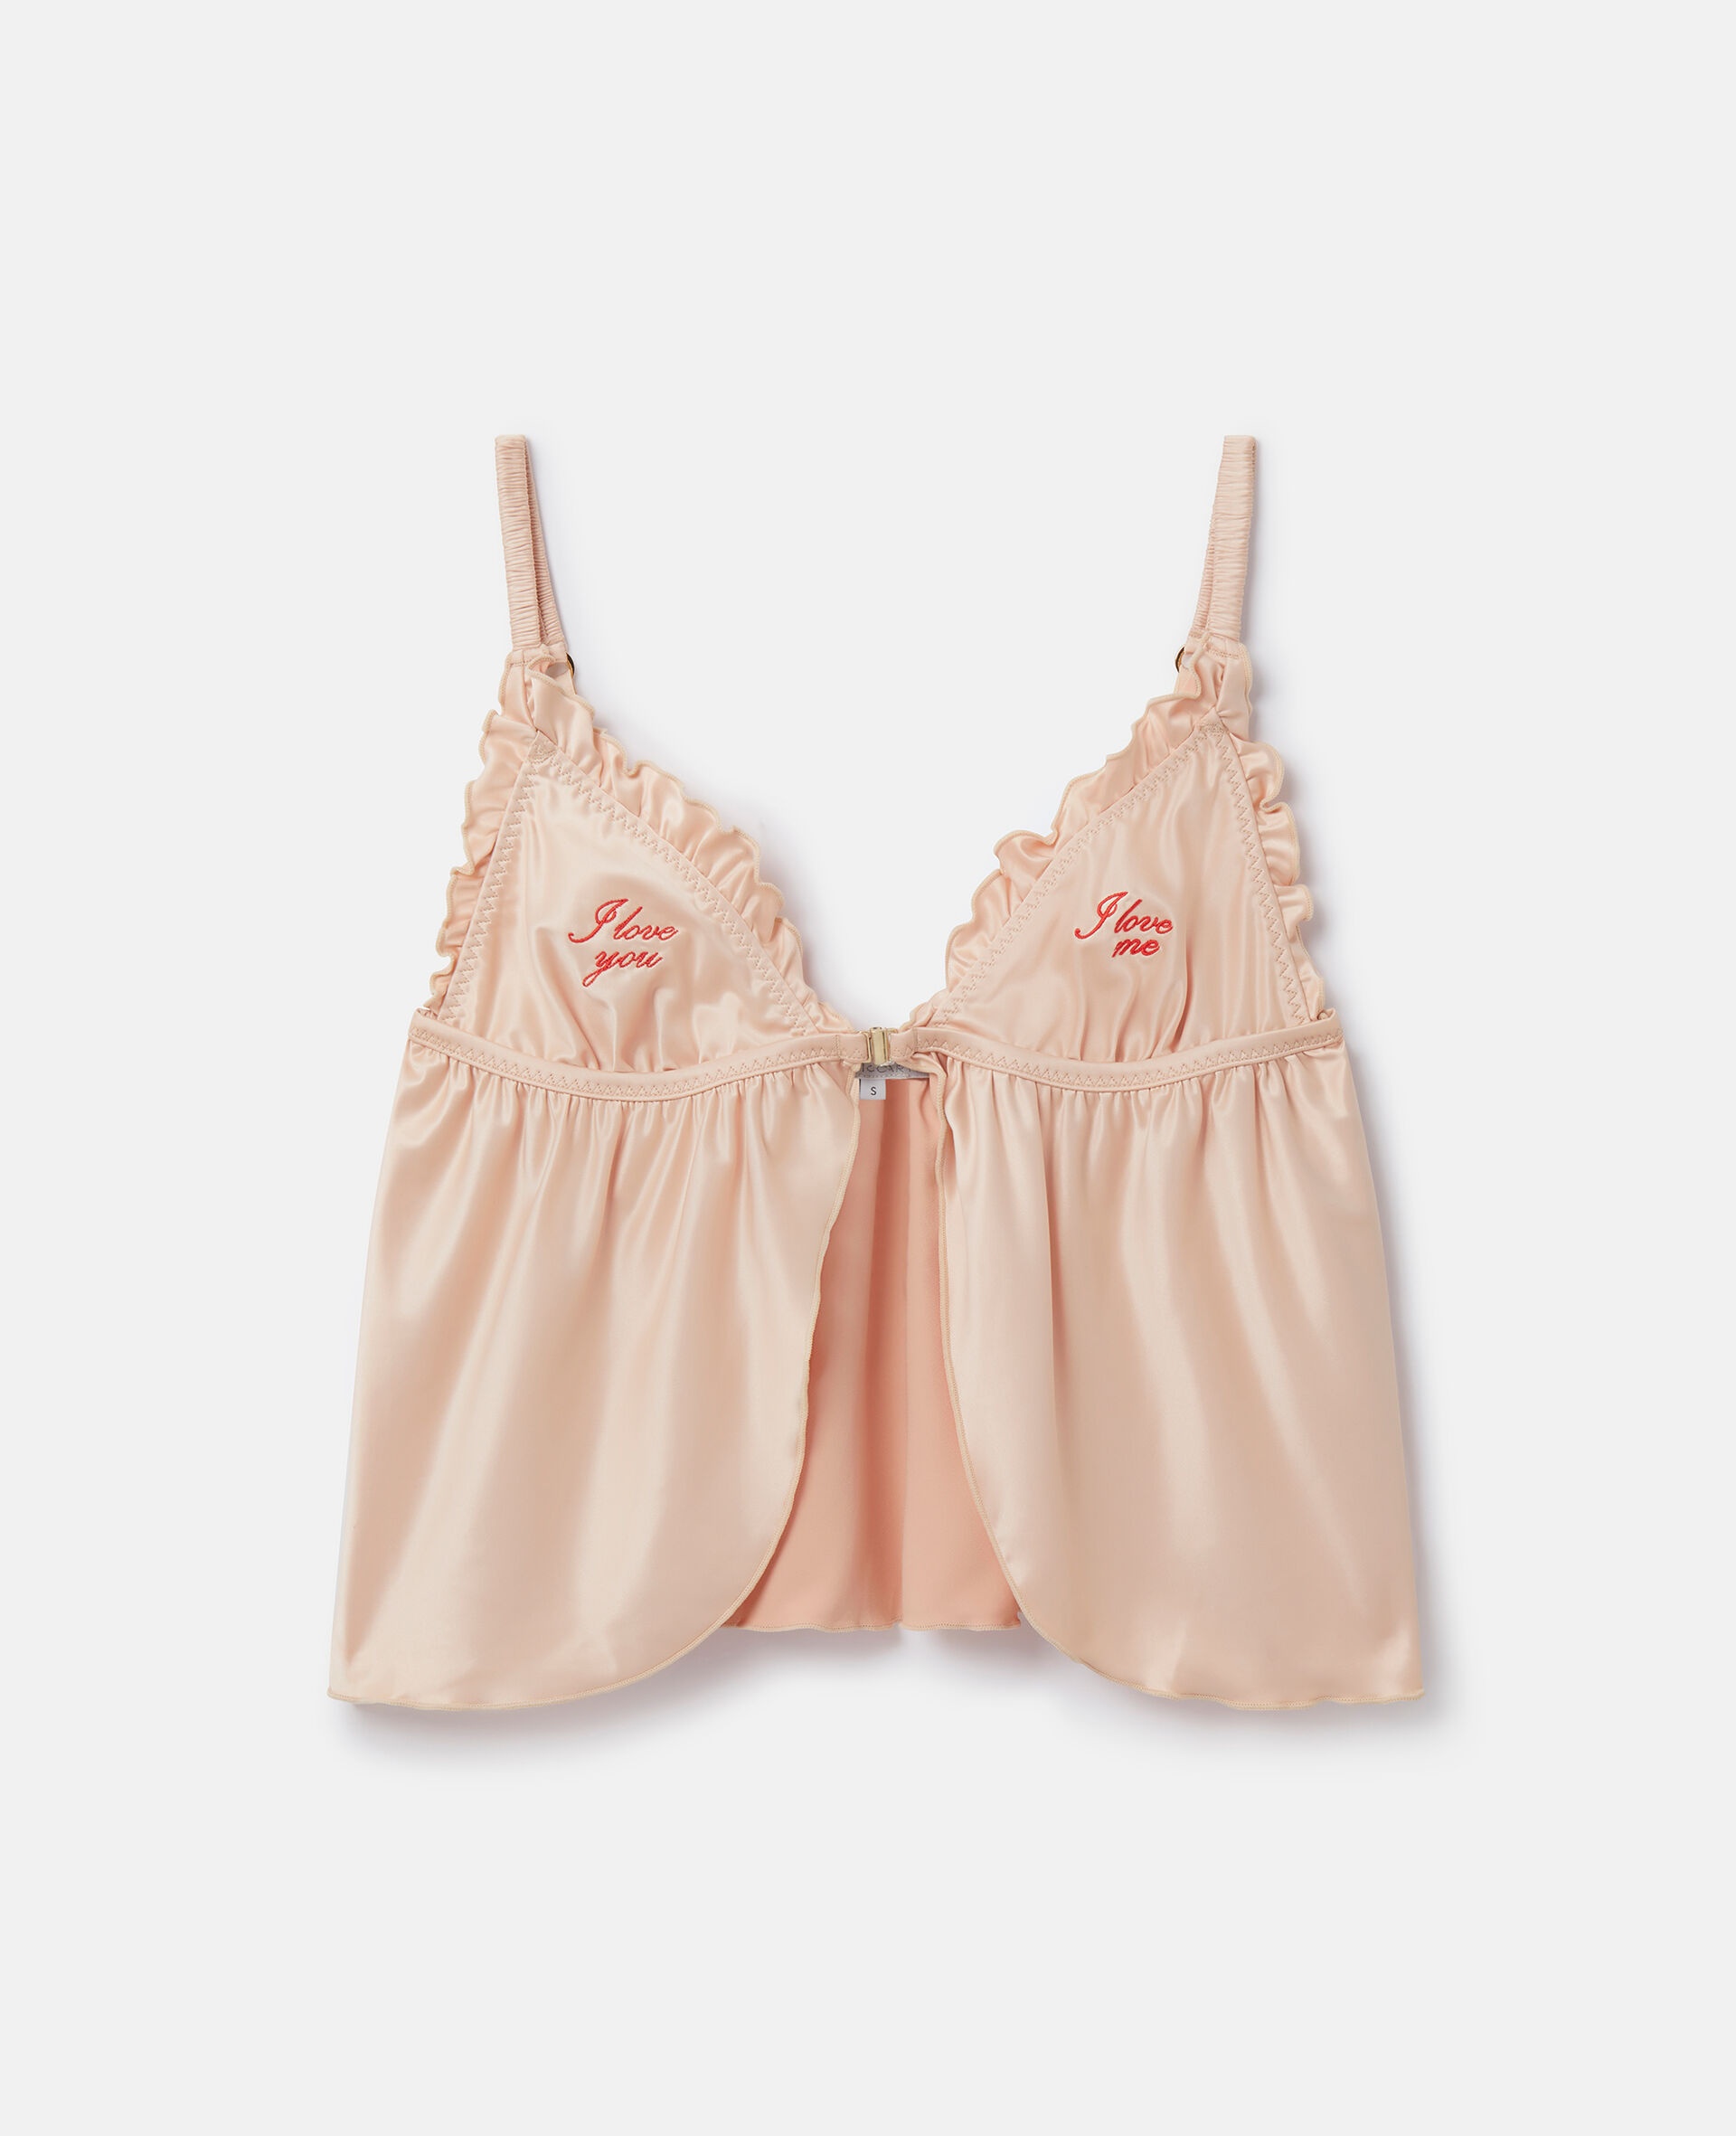 'Love You' Embroidery Satin Flounce Camisole - 1